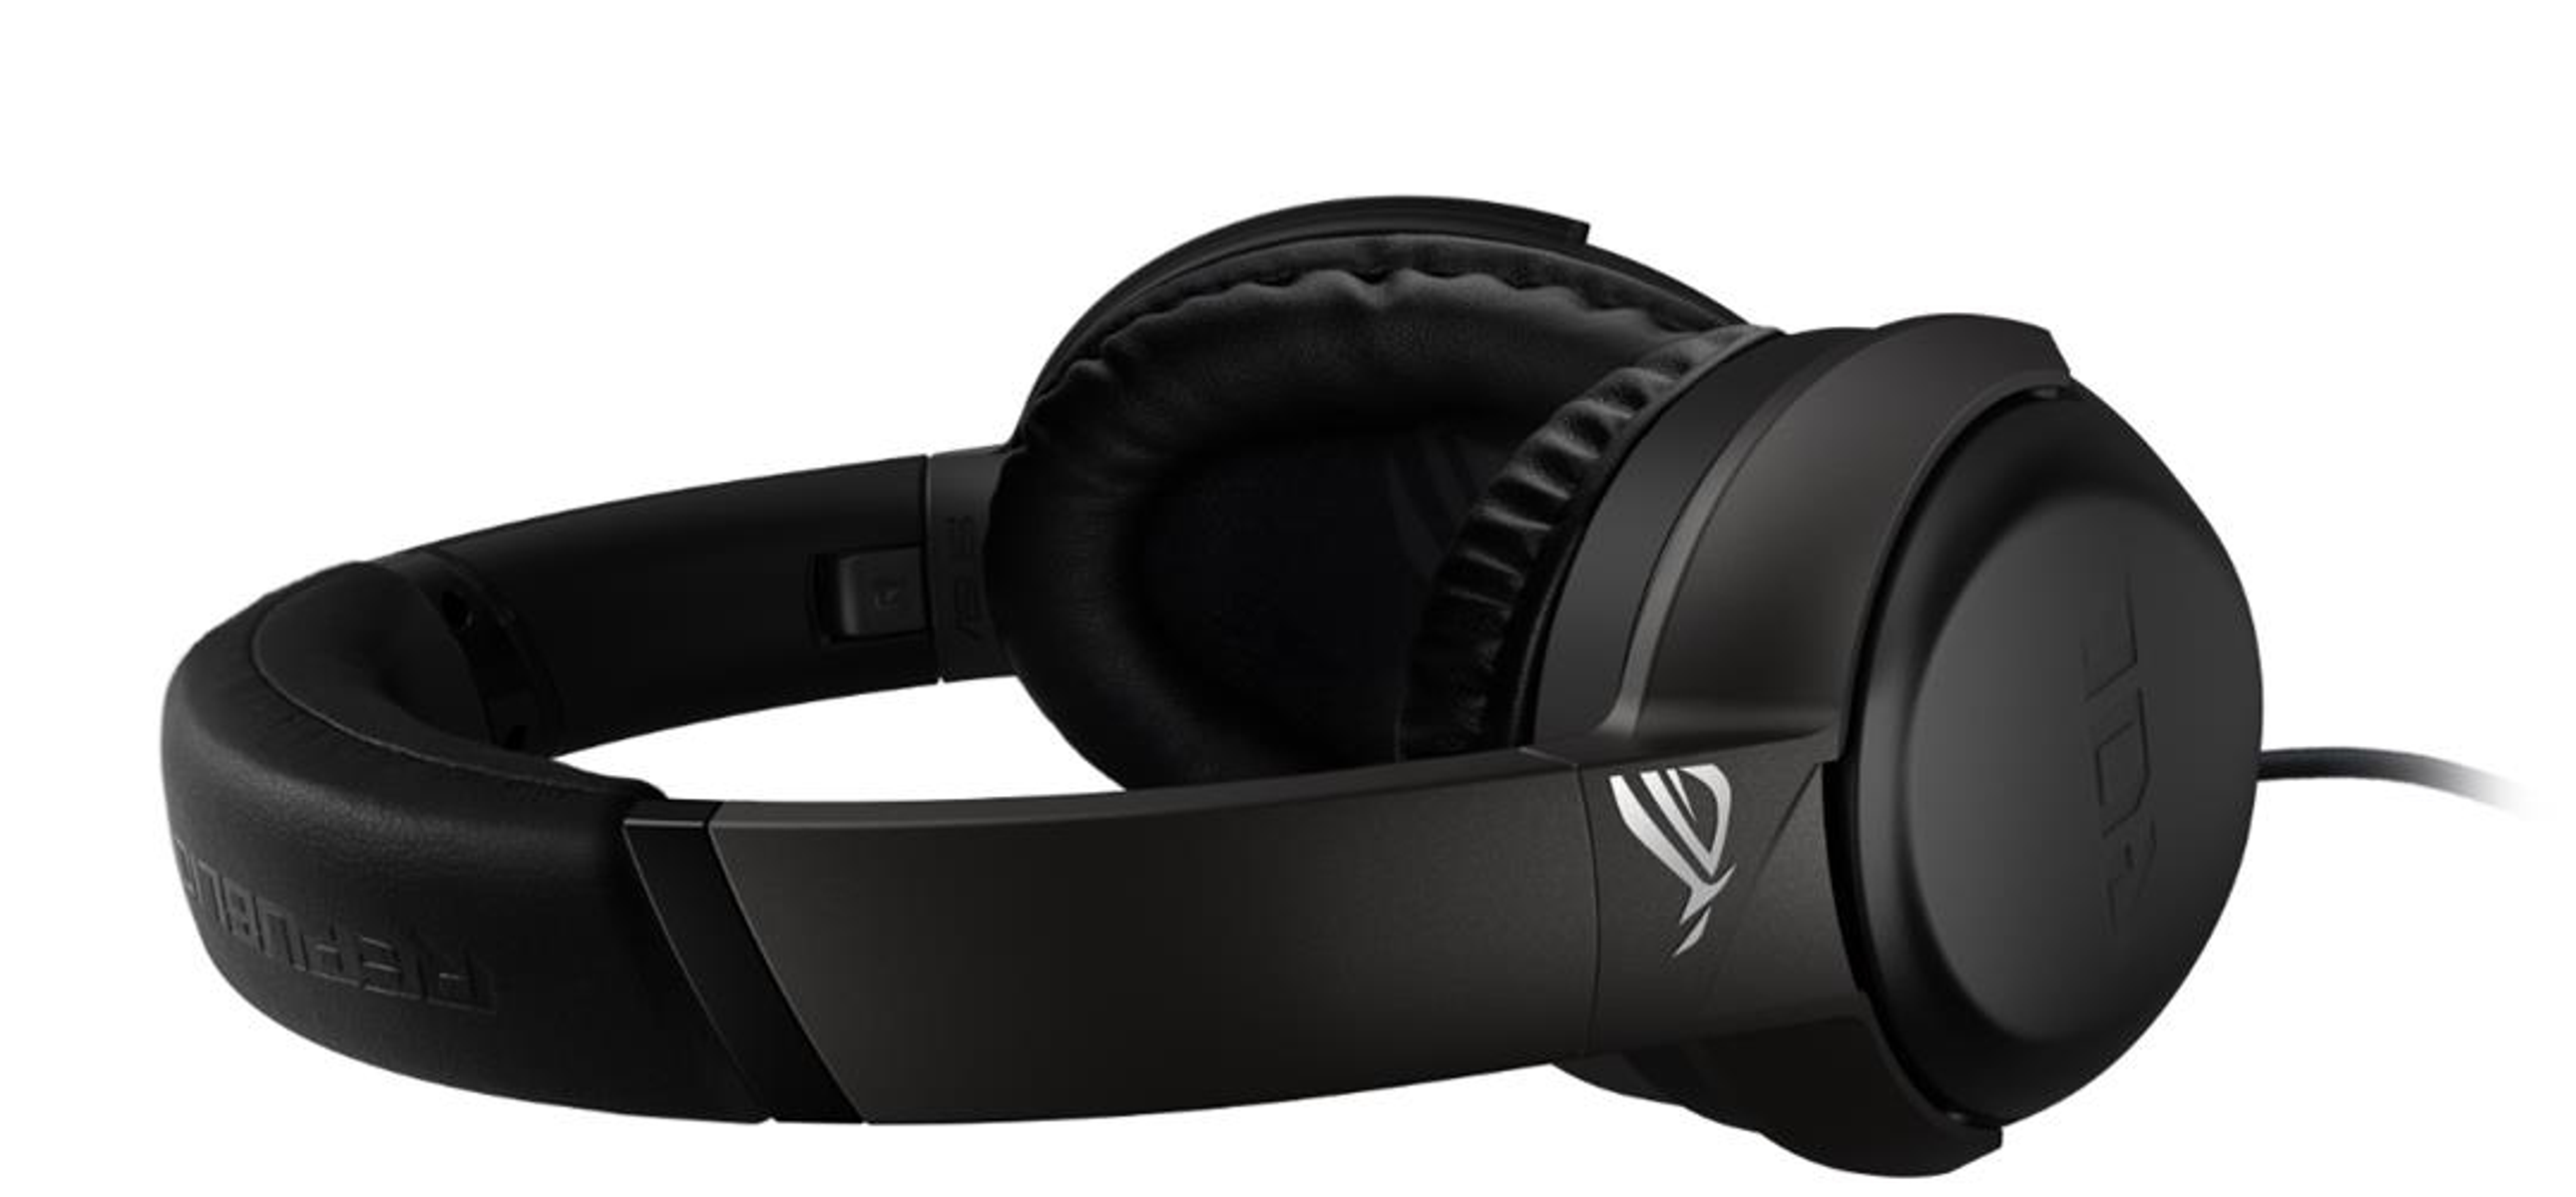 Gaming Headset ASUS Go Schwarz On-ear Core,